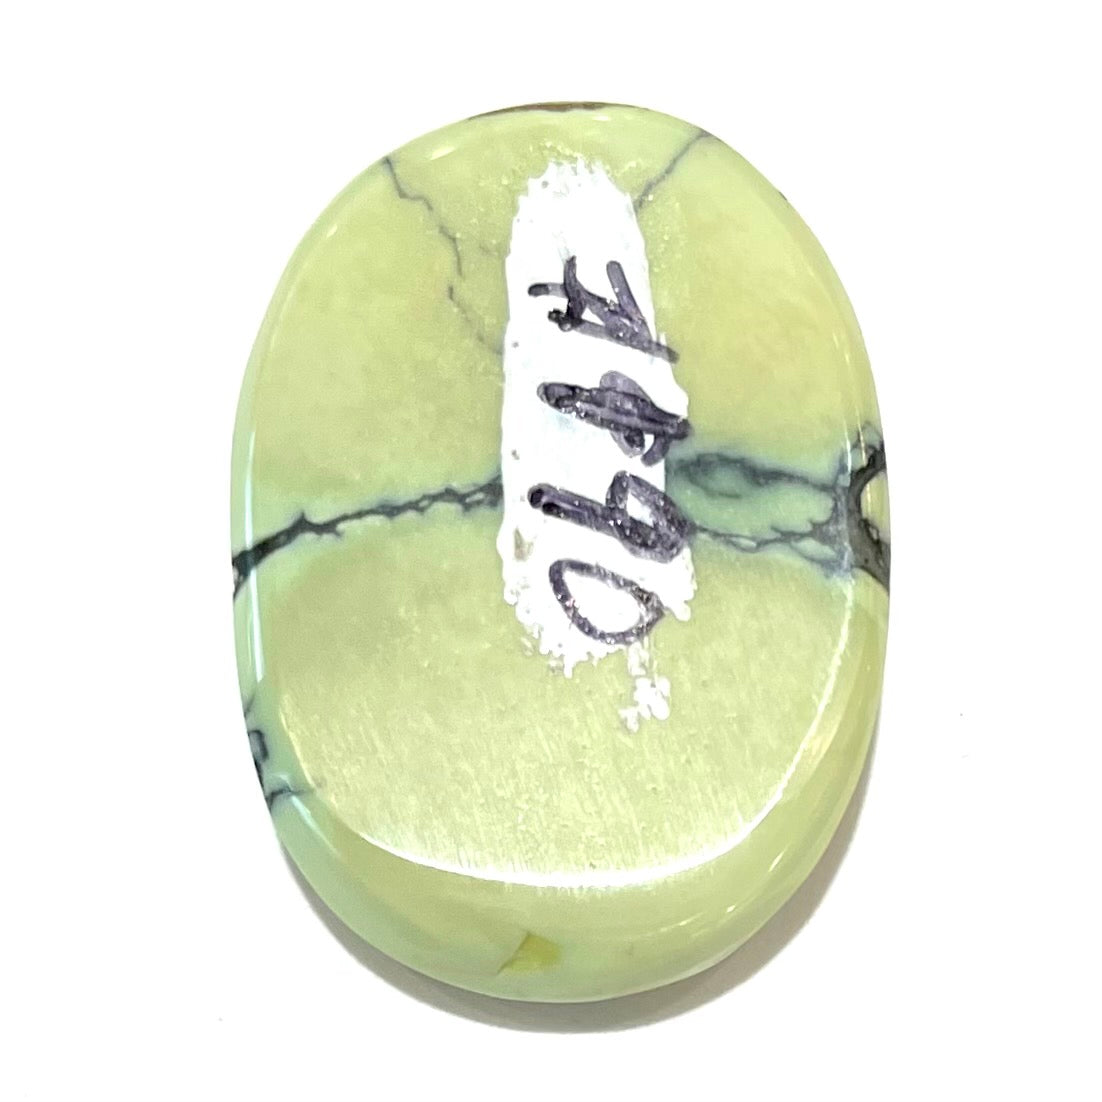 A loose, oval cabochon cut variscite stone from Utah, USA.  The stone is yellow-green with a black matrix.